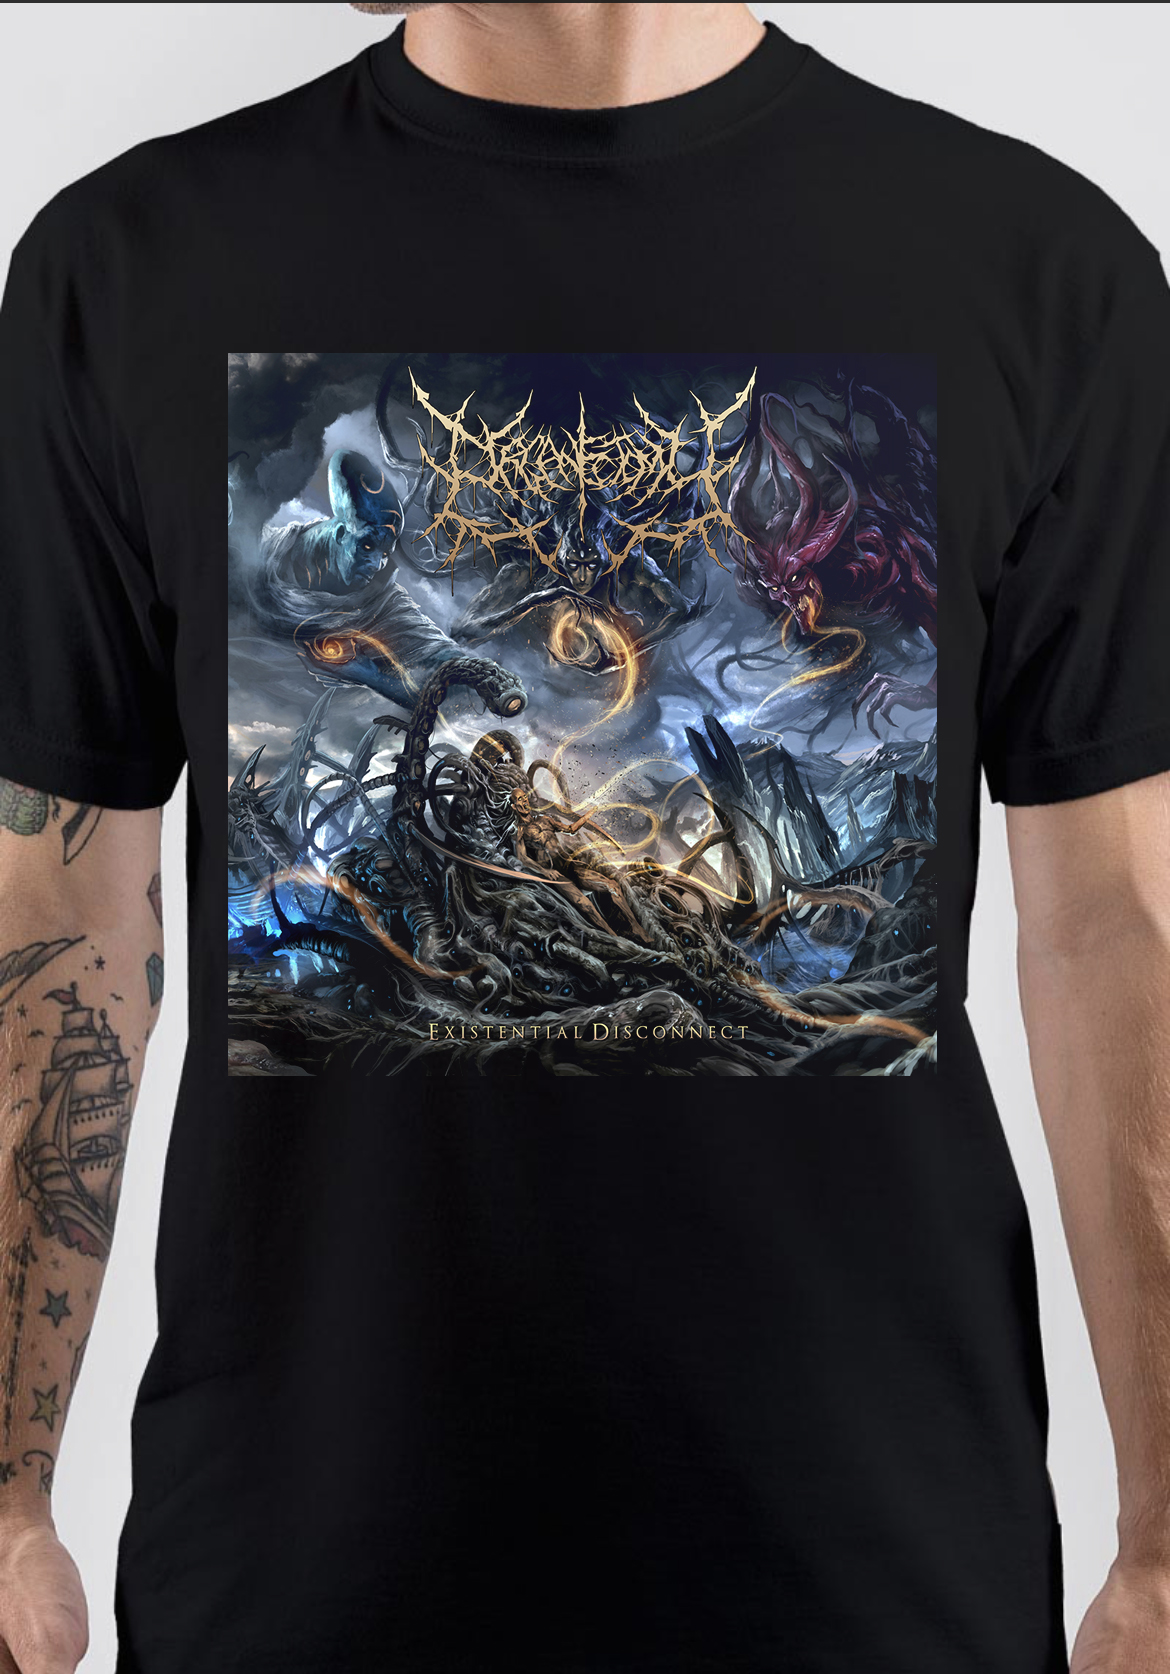 Organectomy T-Shirt And Merchandise